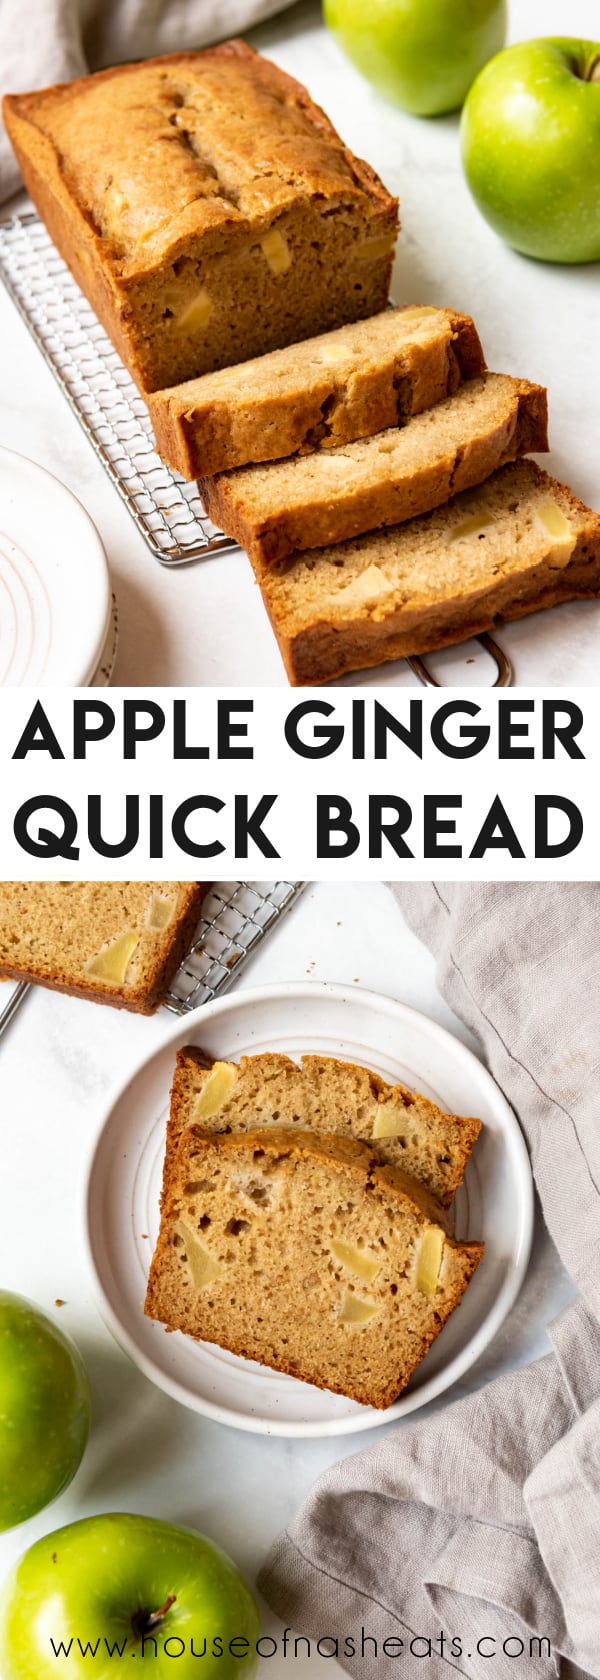 A collage of images of apple ginger quick bread with text overlay.